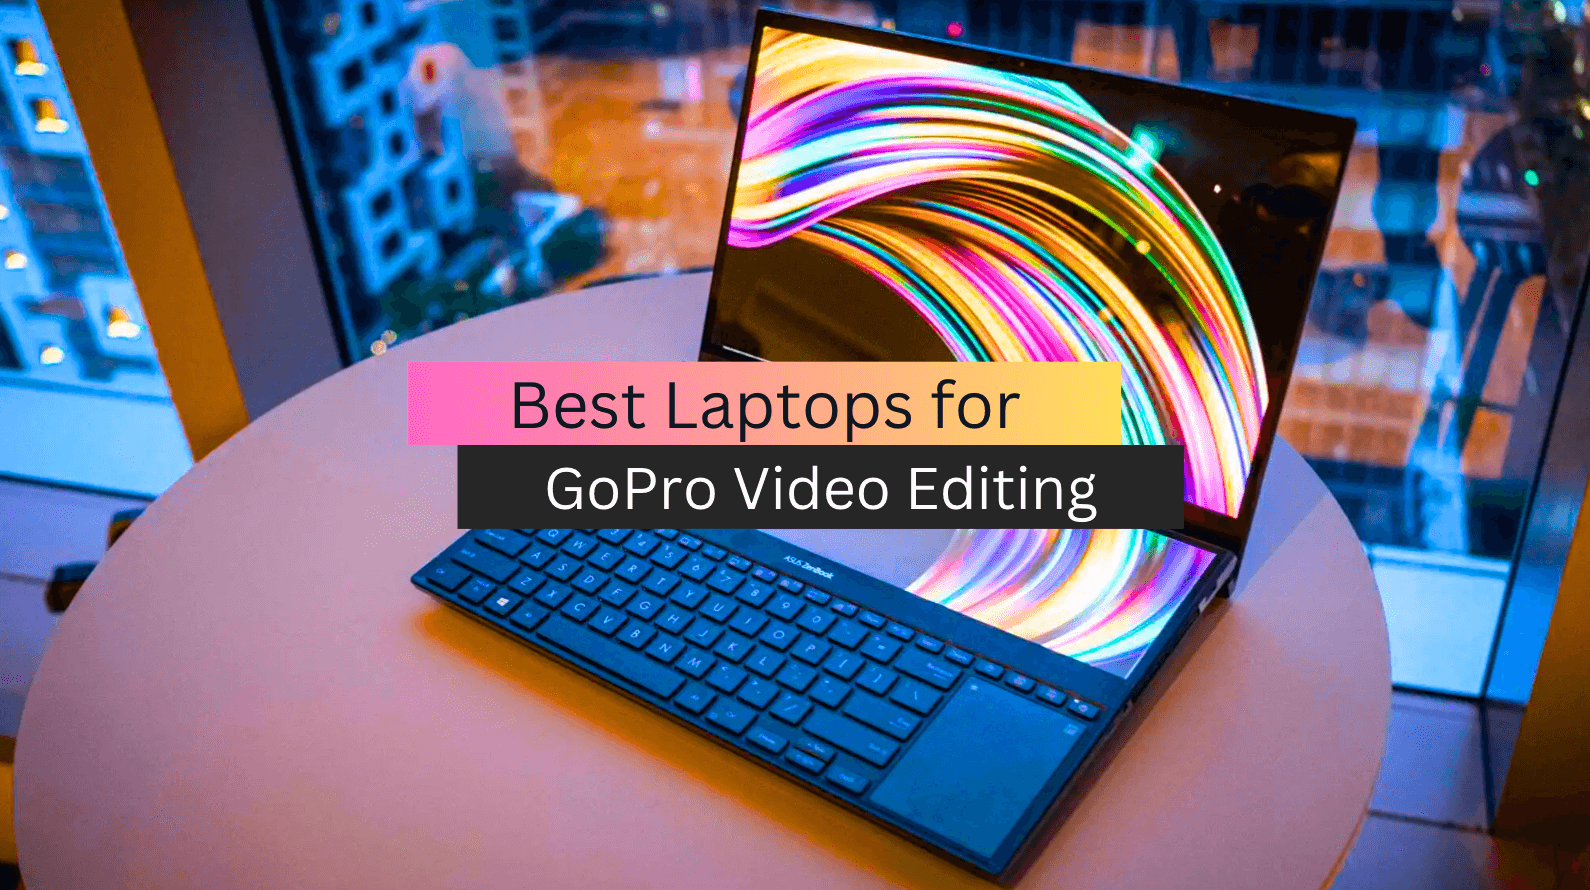 Top 10 Best Laptops for GoPro Video Editing (2023 Guide)